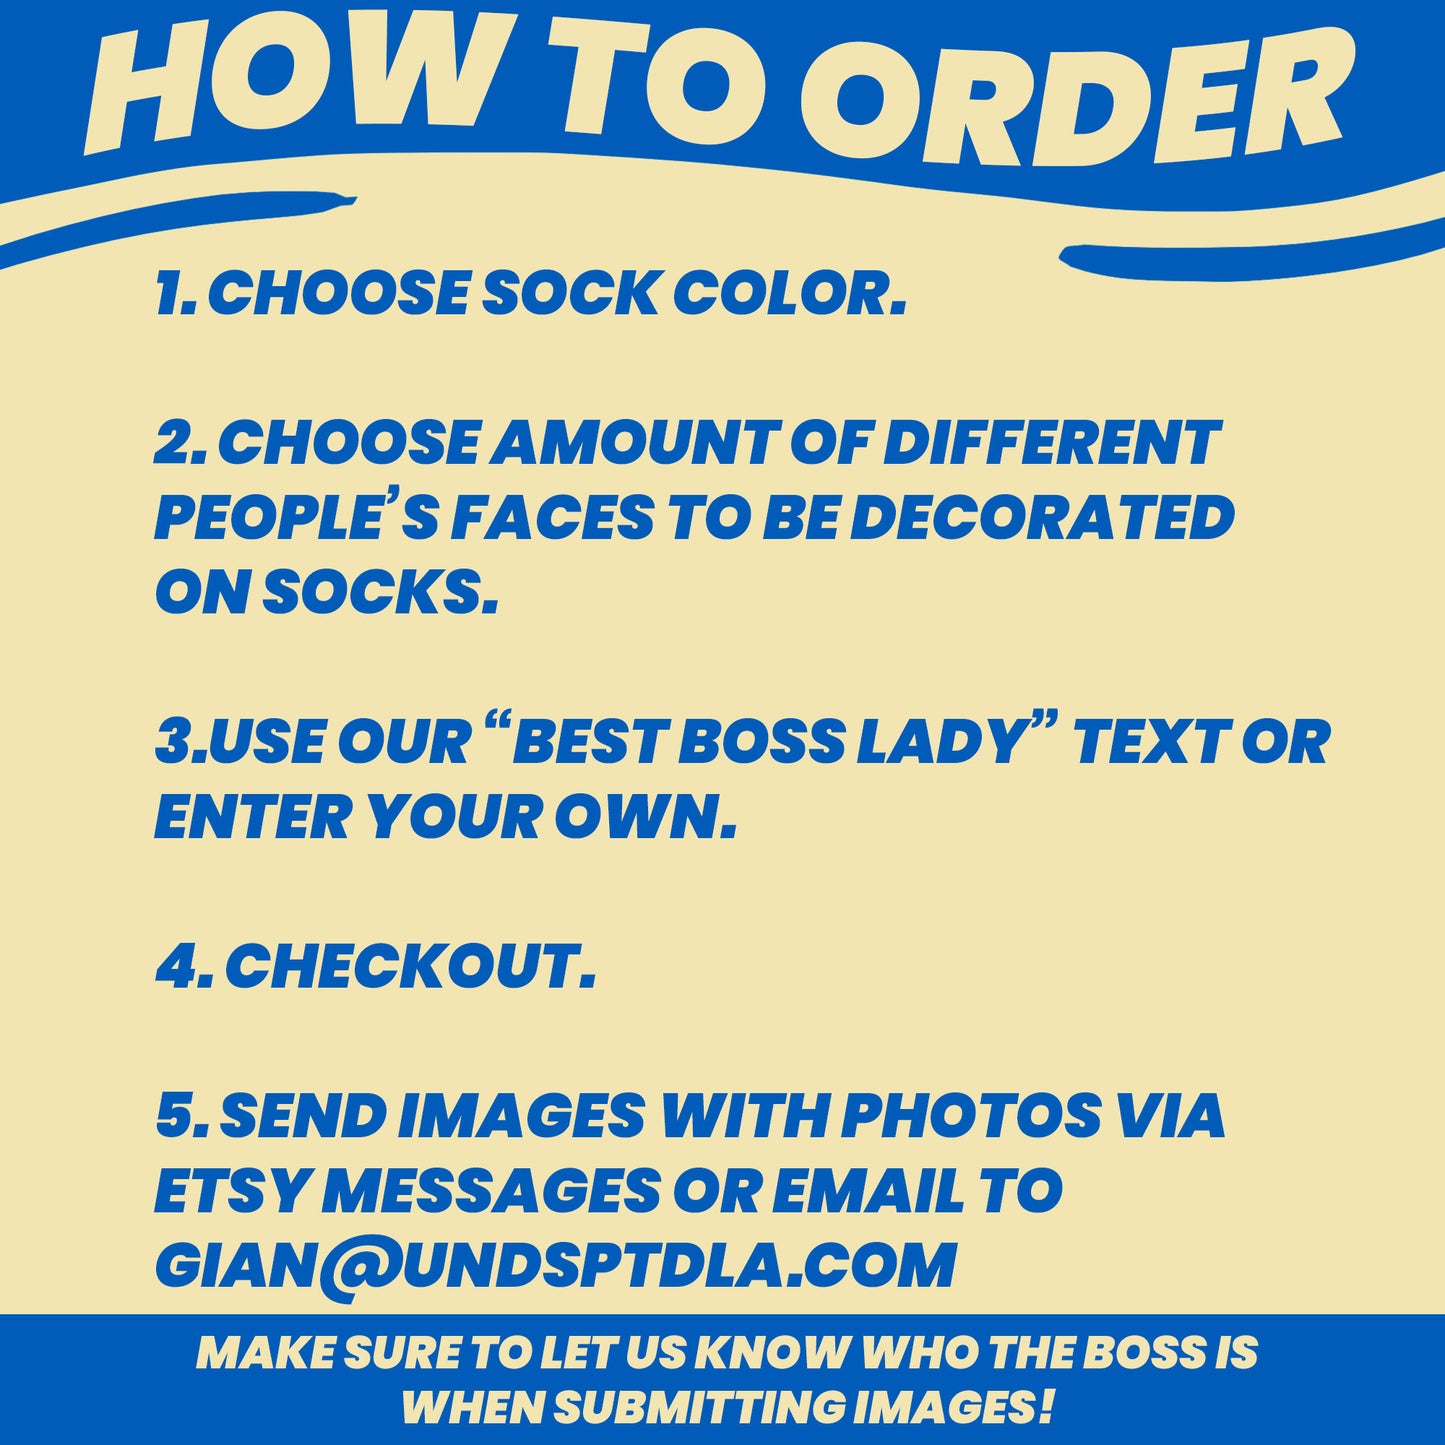 woman boss day gift personalized socks with faces instructions on how to order